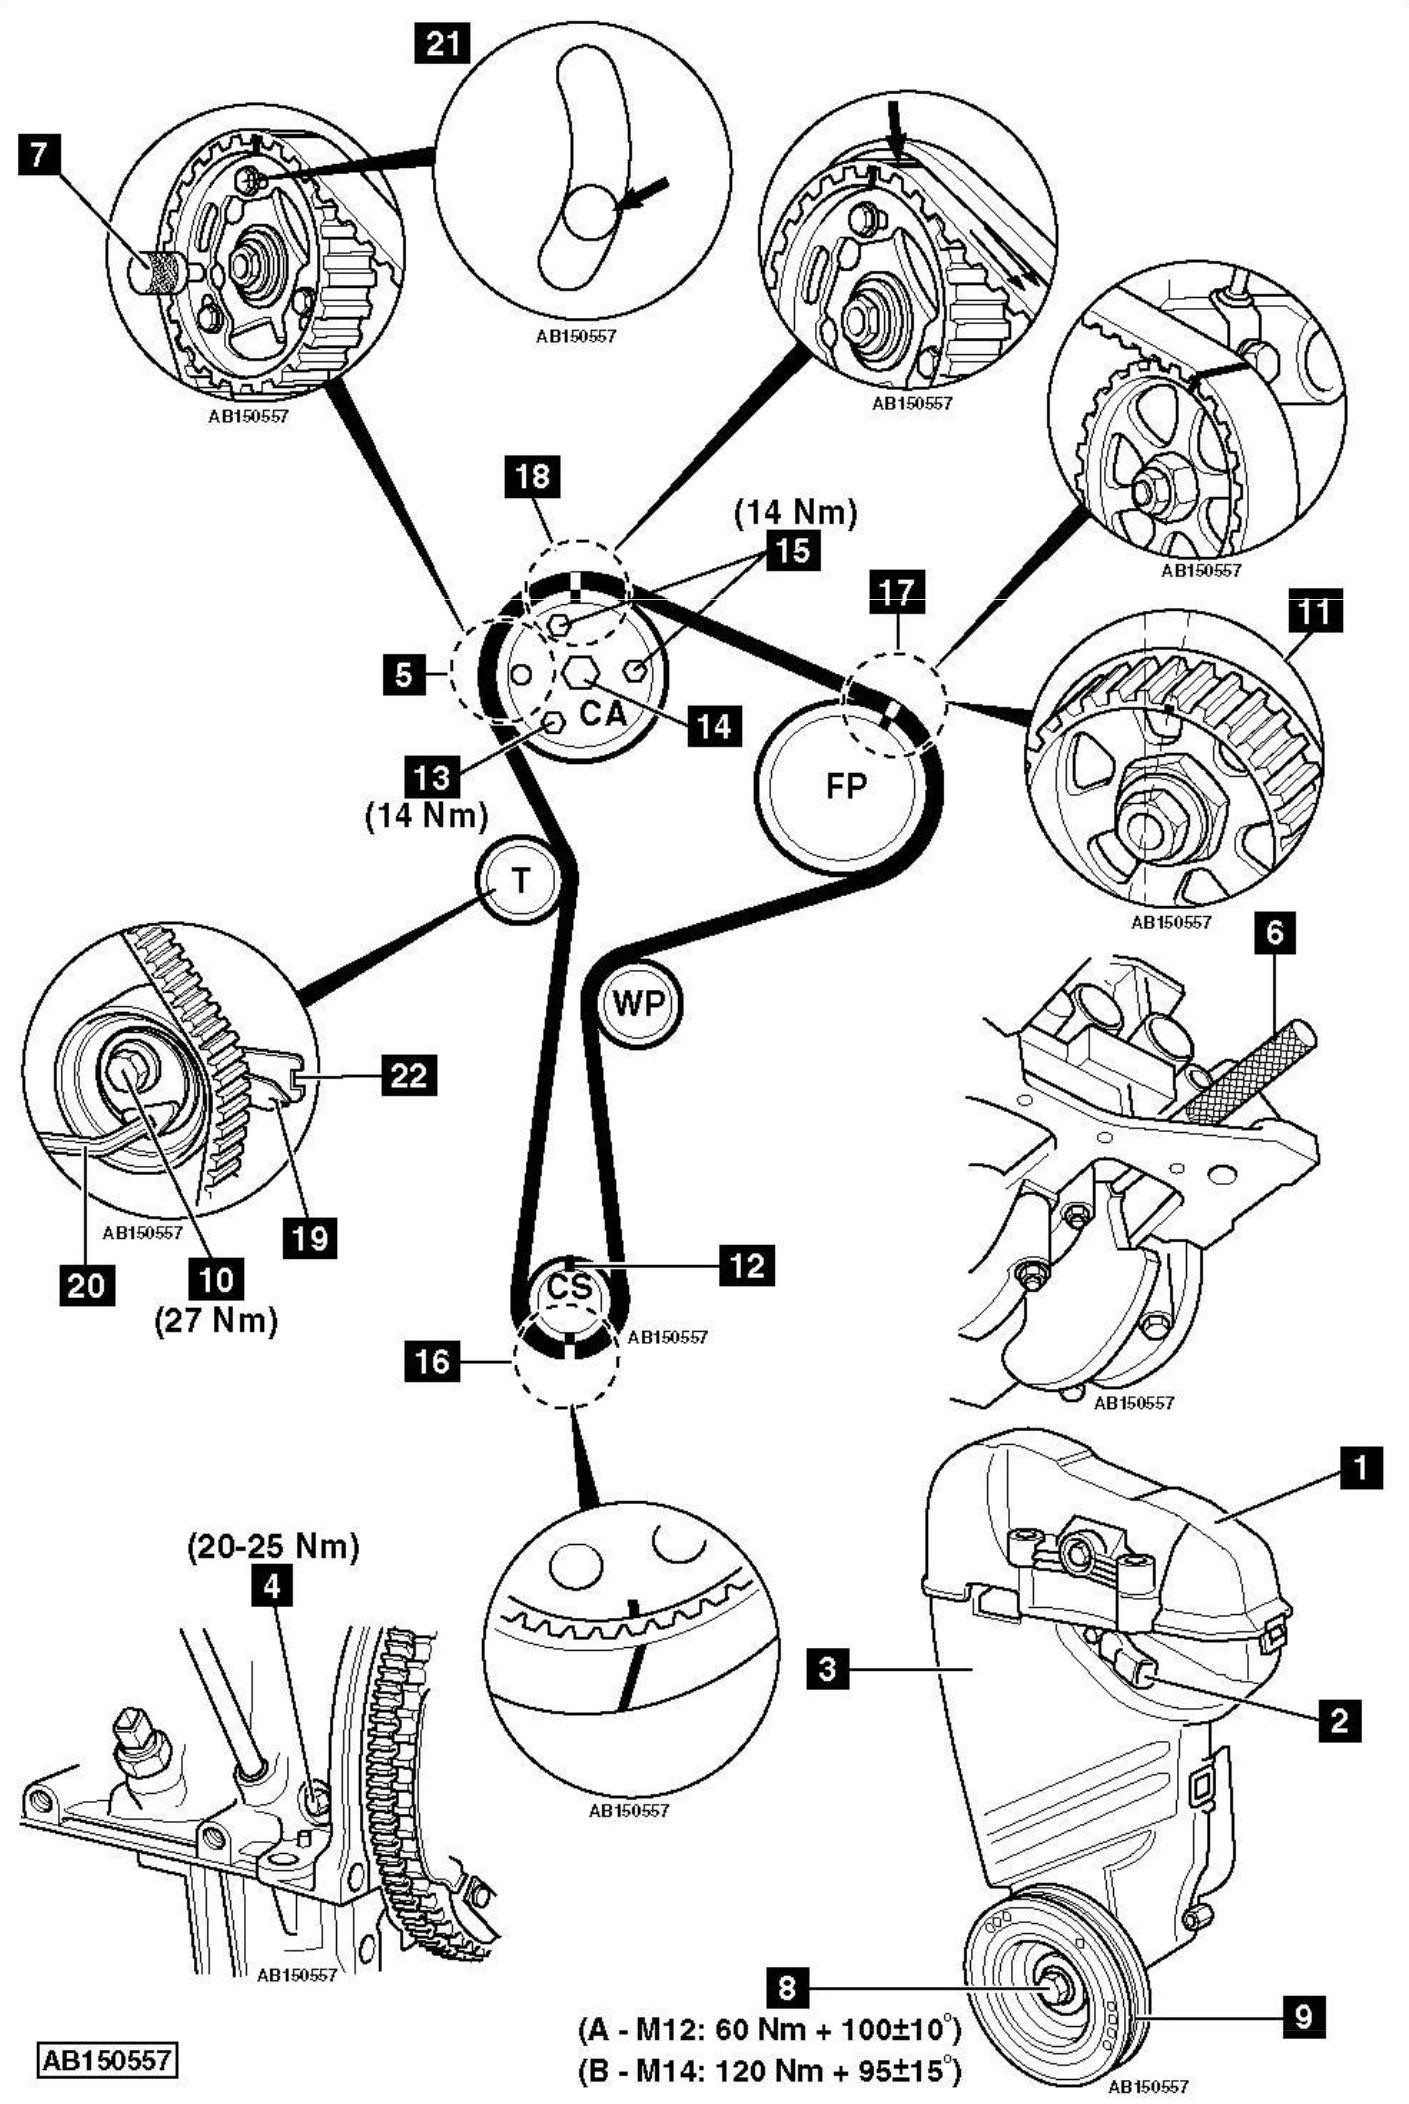 2017 Nv200 Ignition Switch Wiring Diagram from replace-timing-belt.com